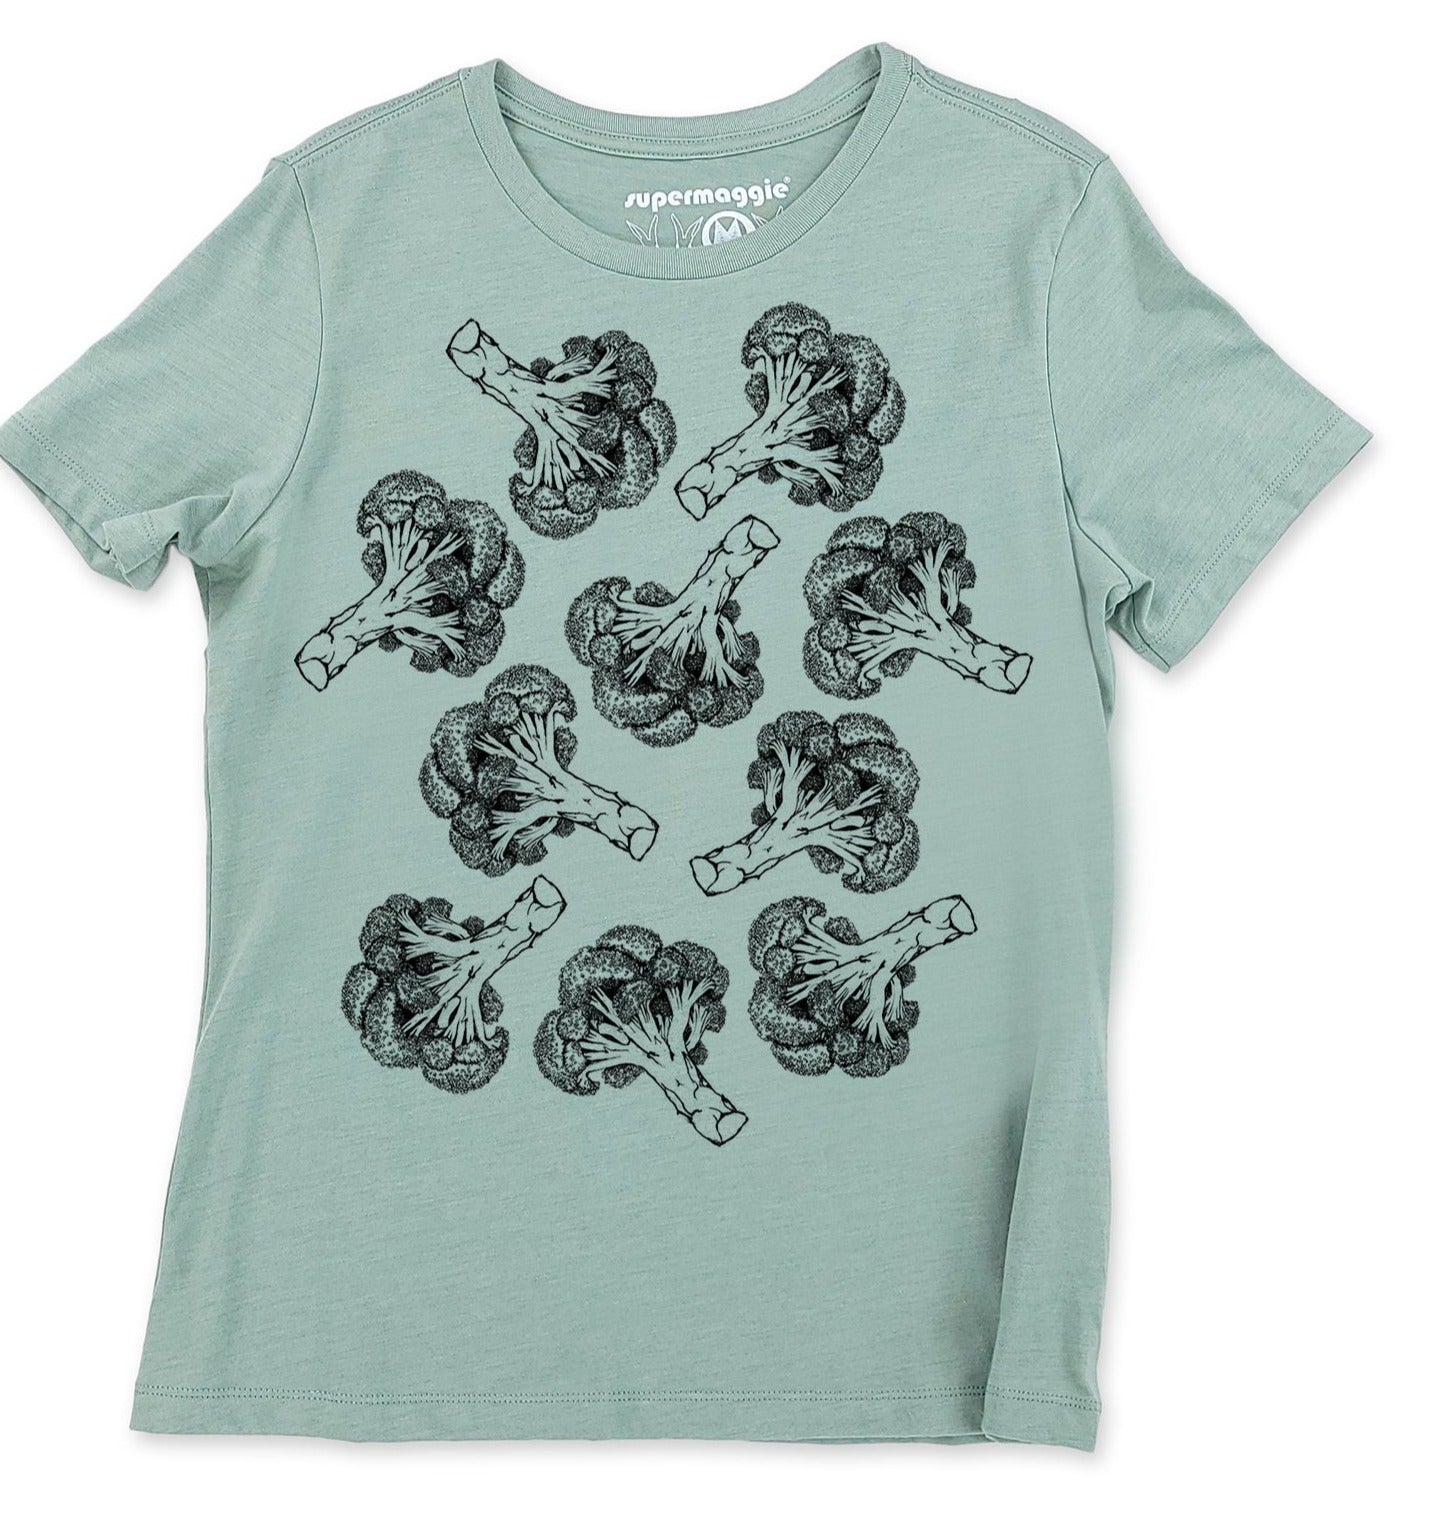 A seafoam green tshirt with illustrations of broccoli stalks all over the front in black ink. 